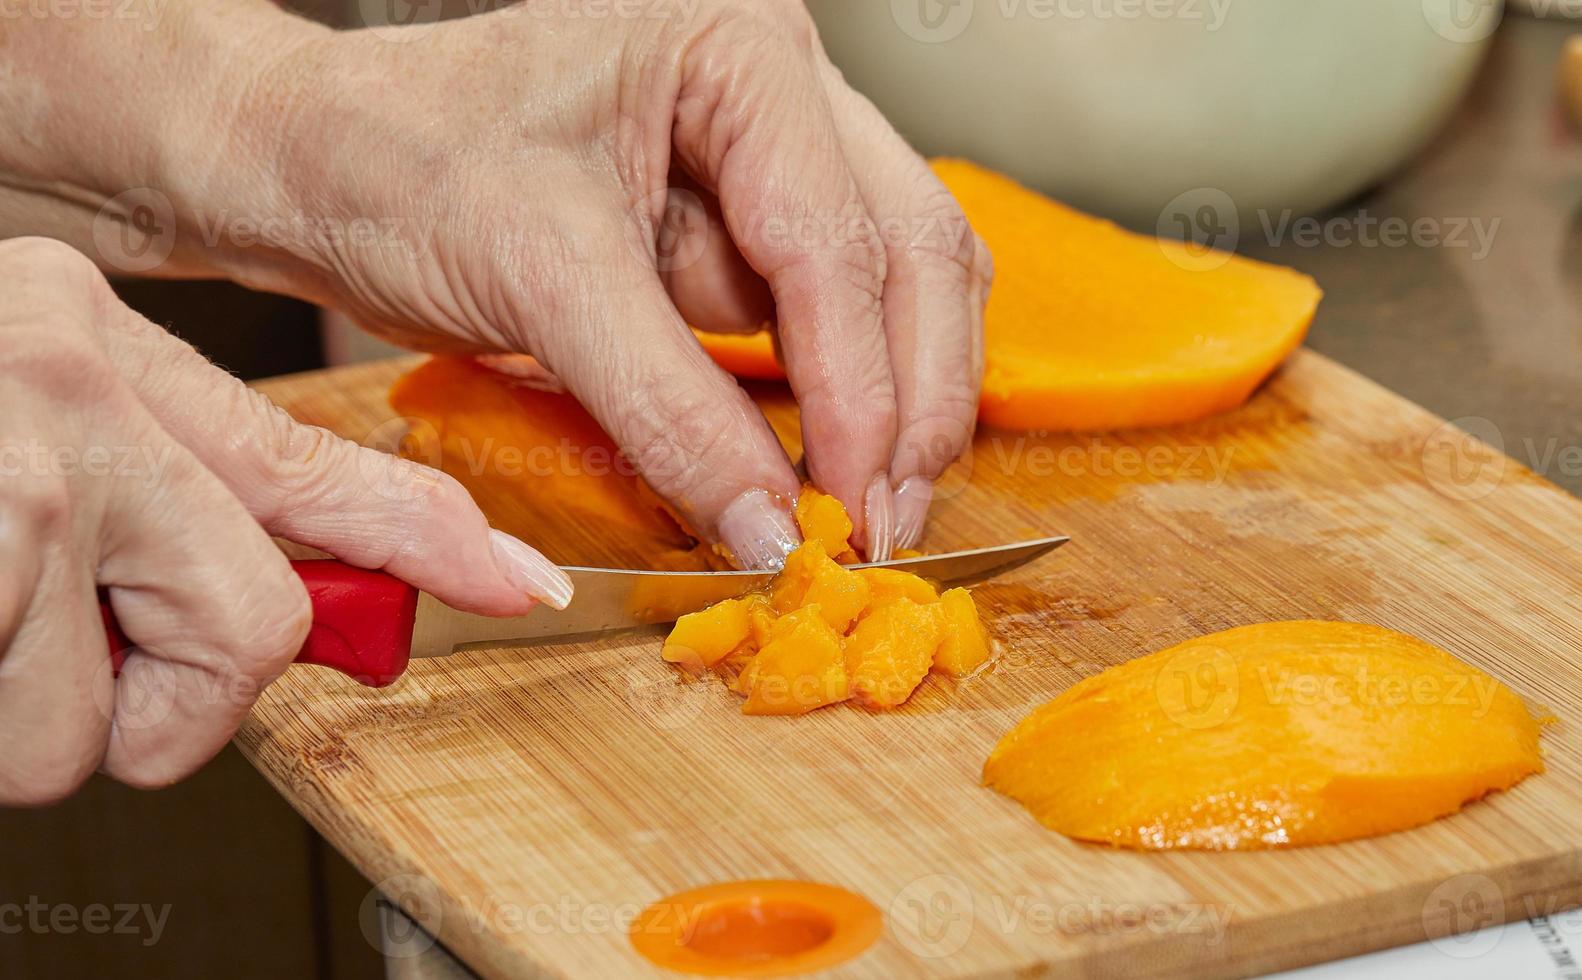 Cook cuts juicy mango into slices for making salad photo